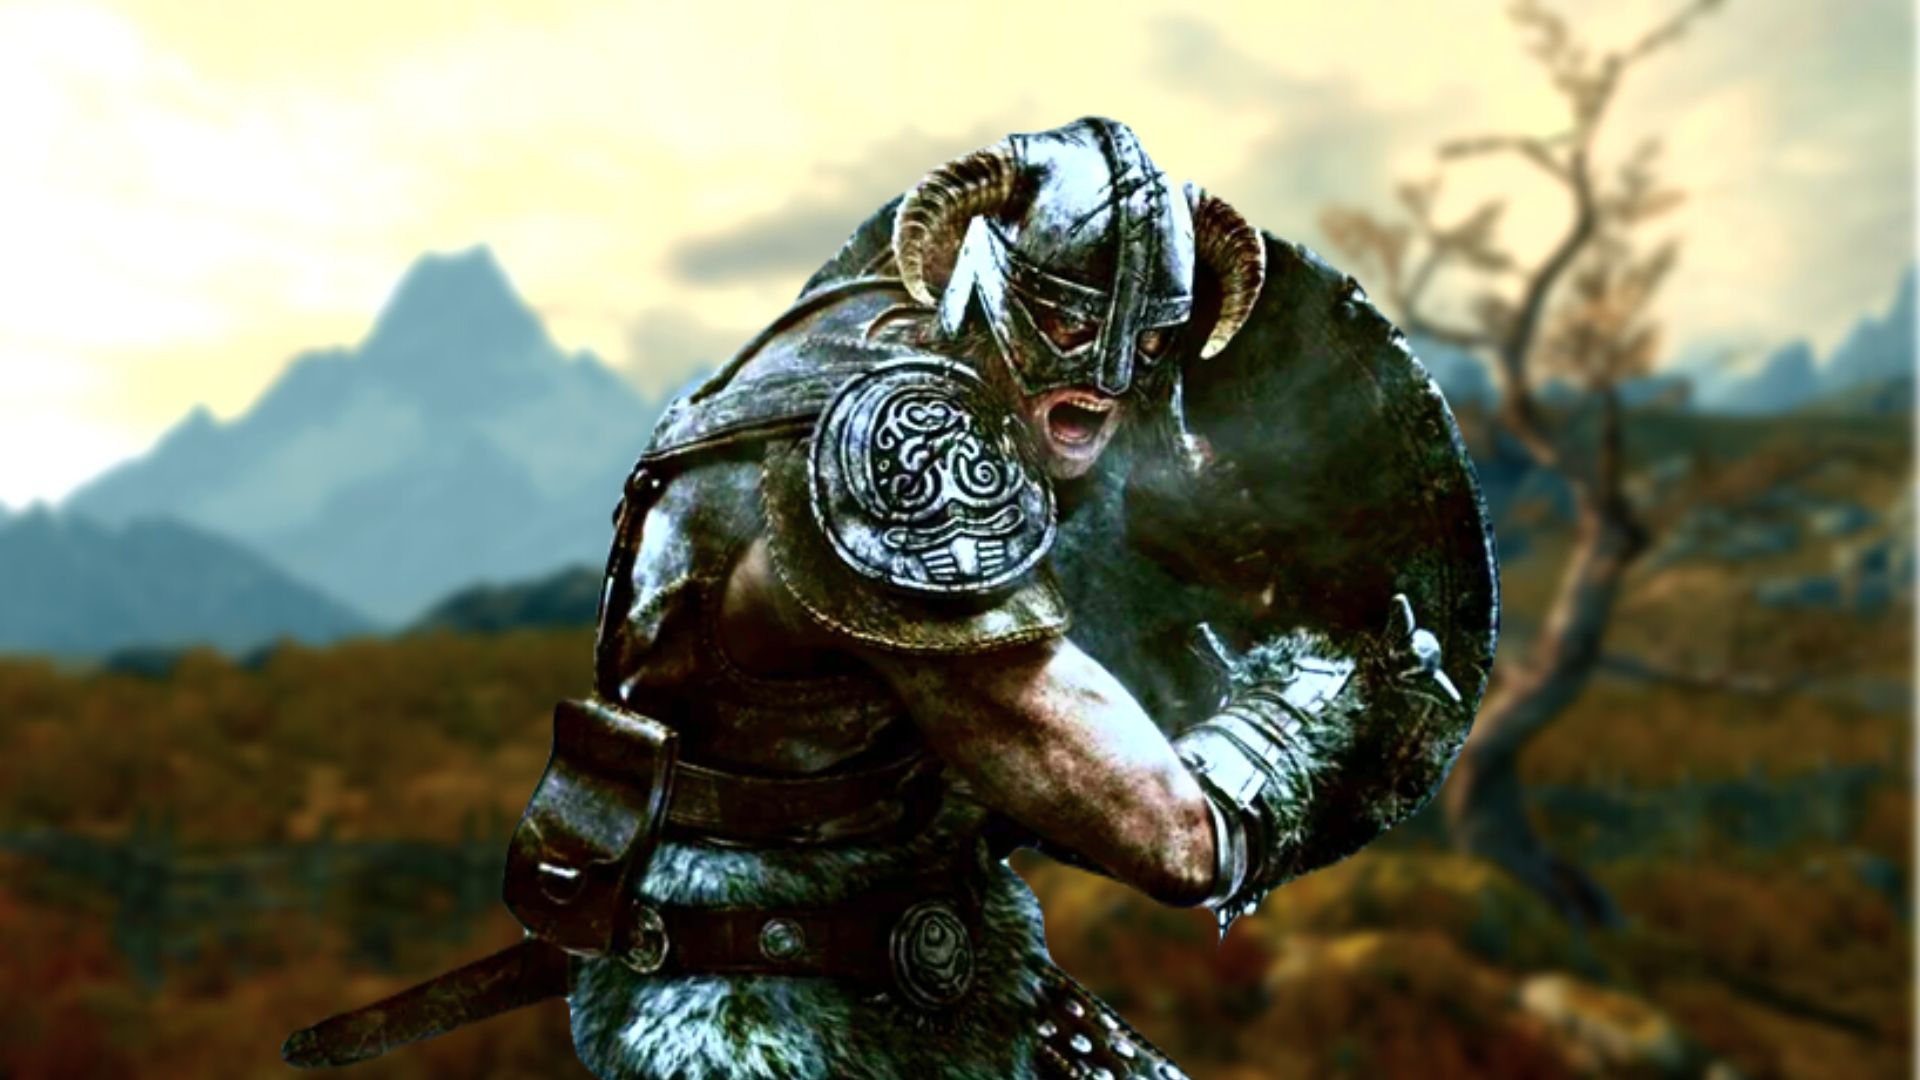 Skyrim Steam sale the perfect excuse to play one of the best PC games